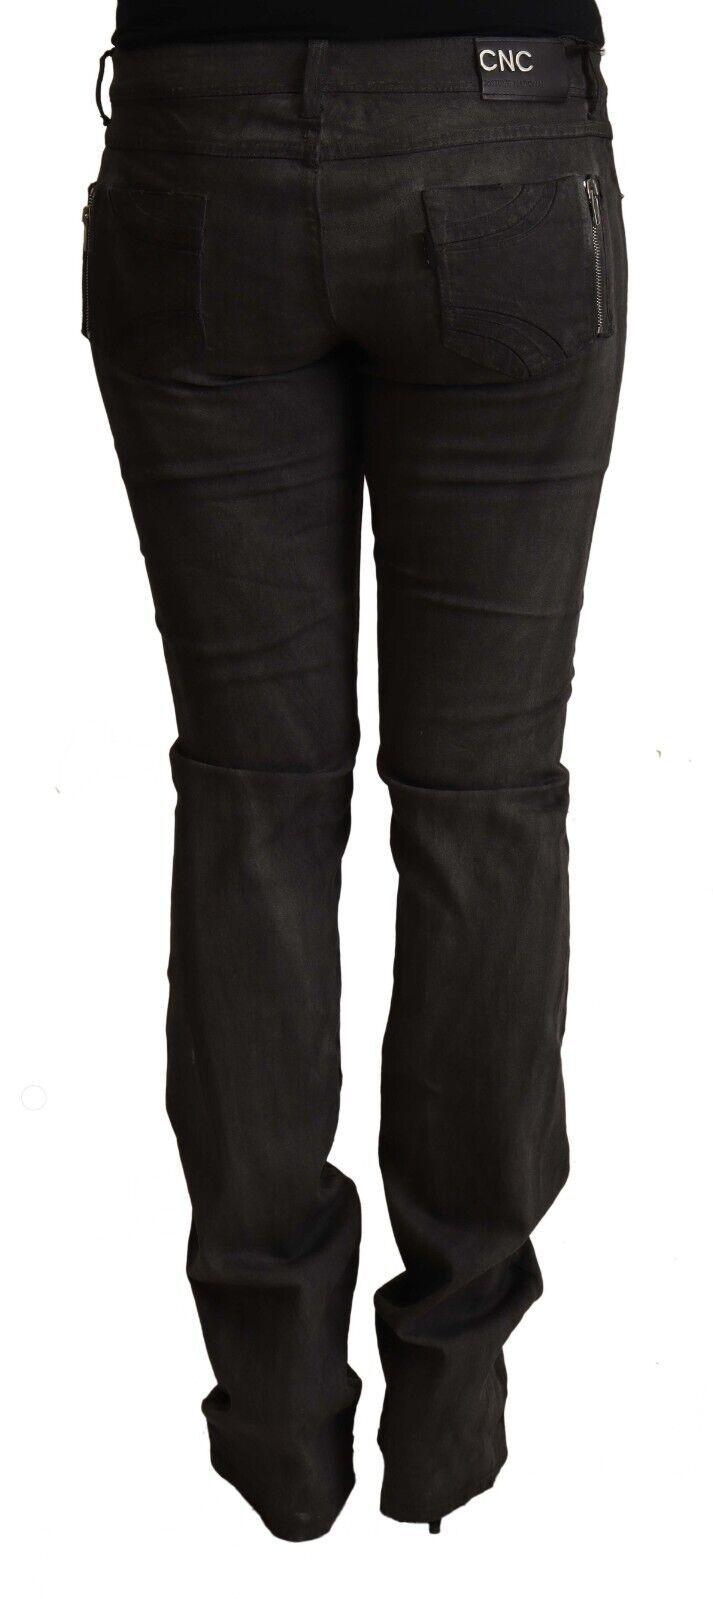 Costume National Ladies' Black Cotton Mid Waist Skinny Pants - Designed by Costume National Available to Buy at a Discounted Price on Moon Behind The Hill Online Designer Discount Store